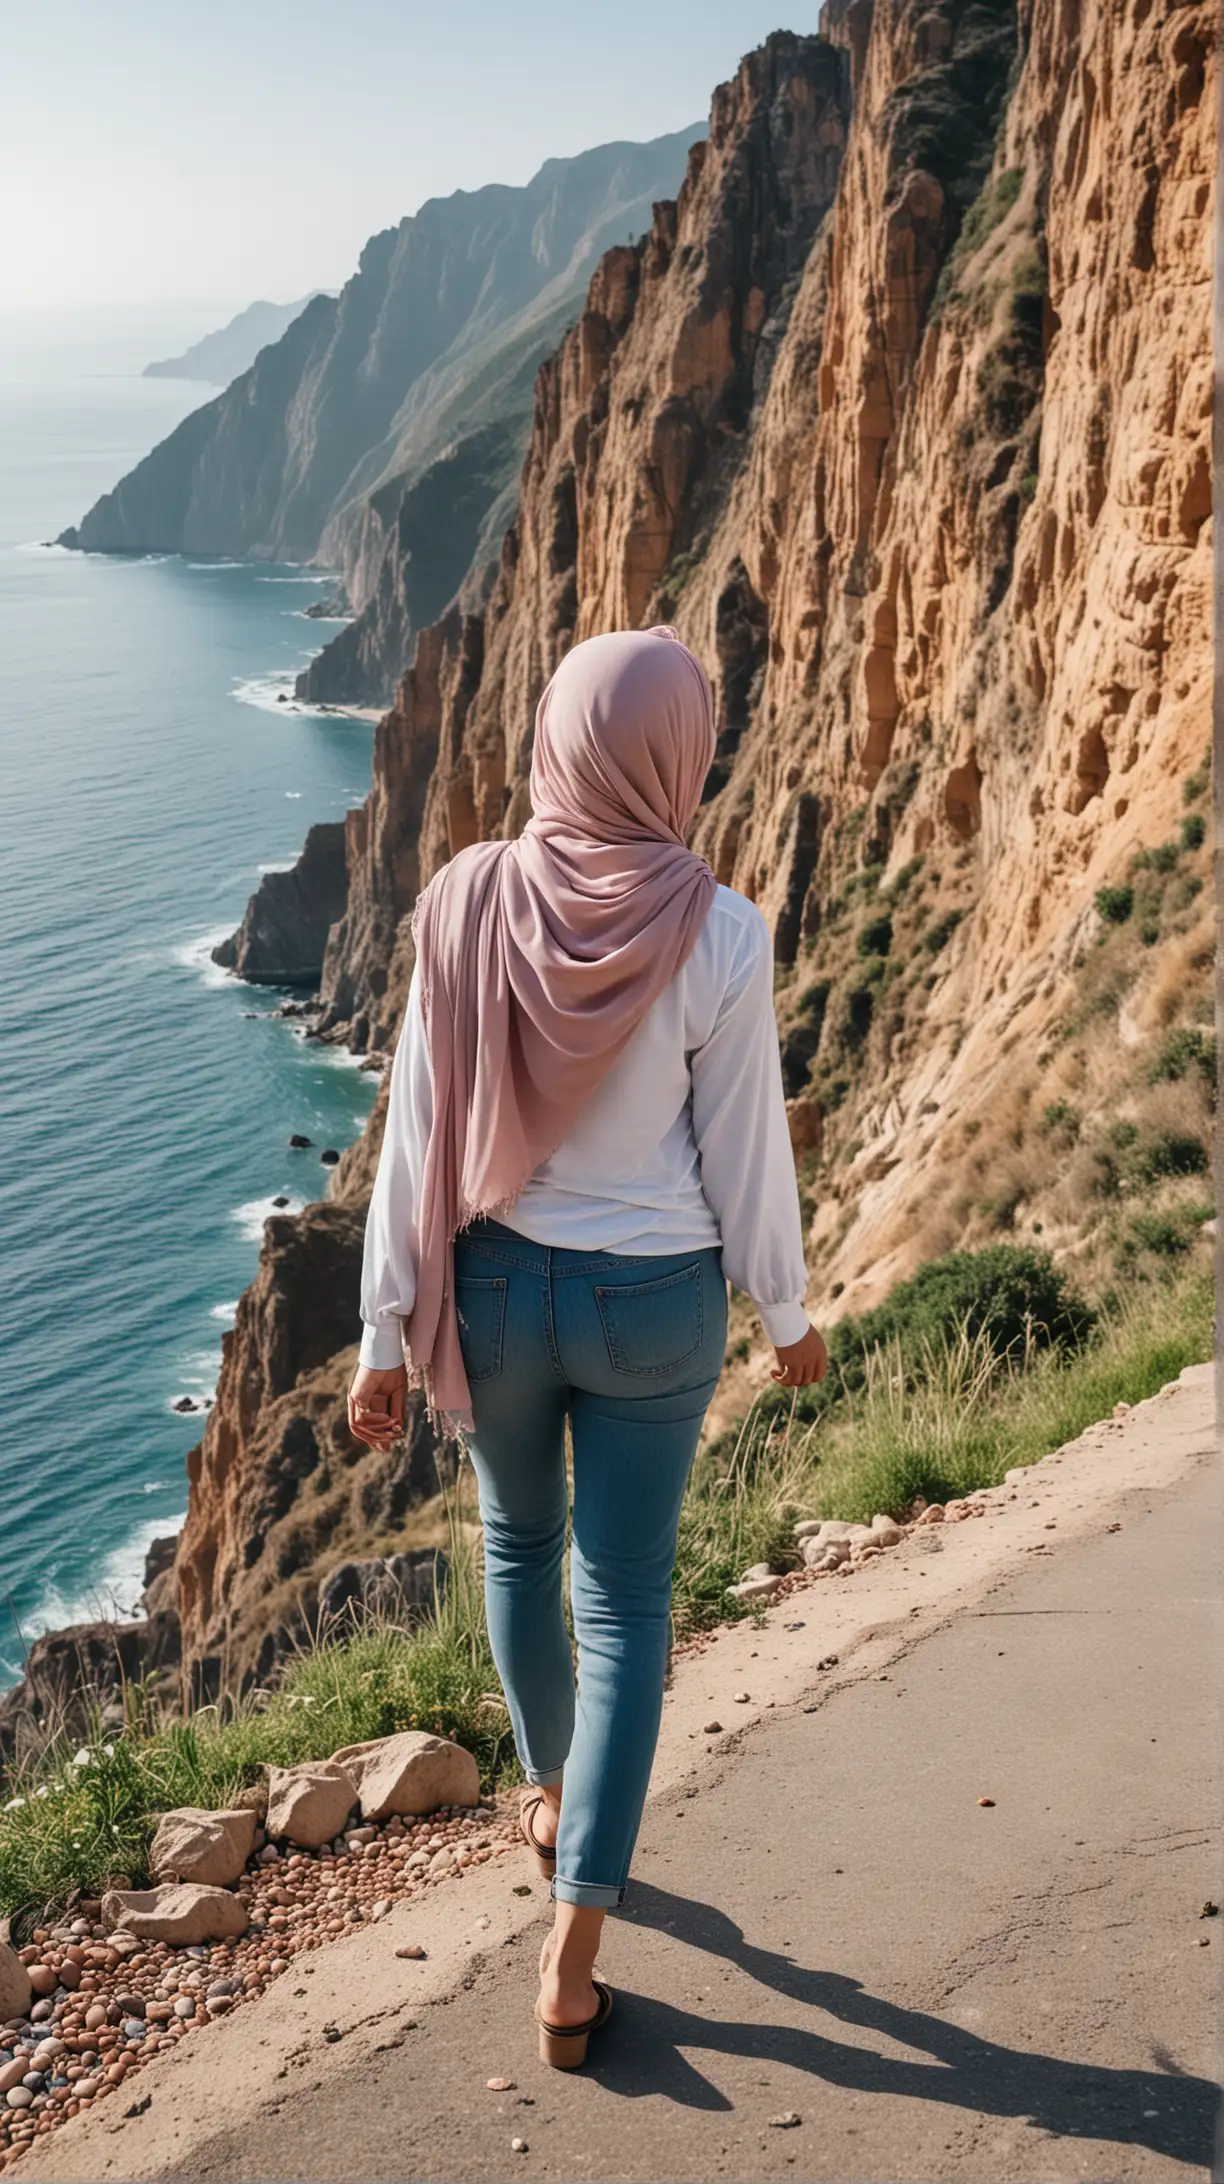 Stylish Woman in Hijab and Ripped Jeans Walking by Seaside Mountain Road